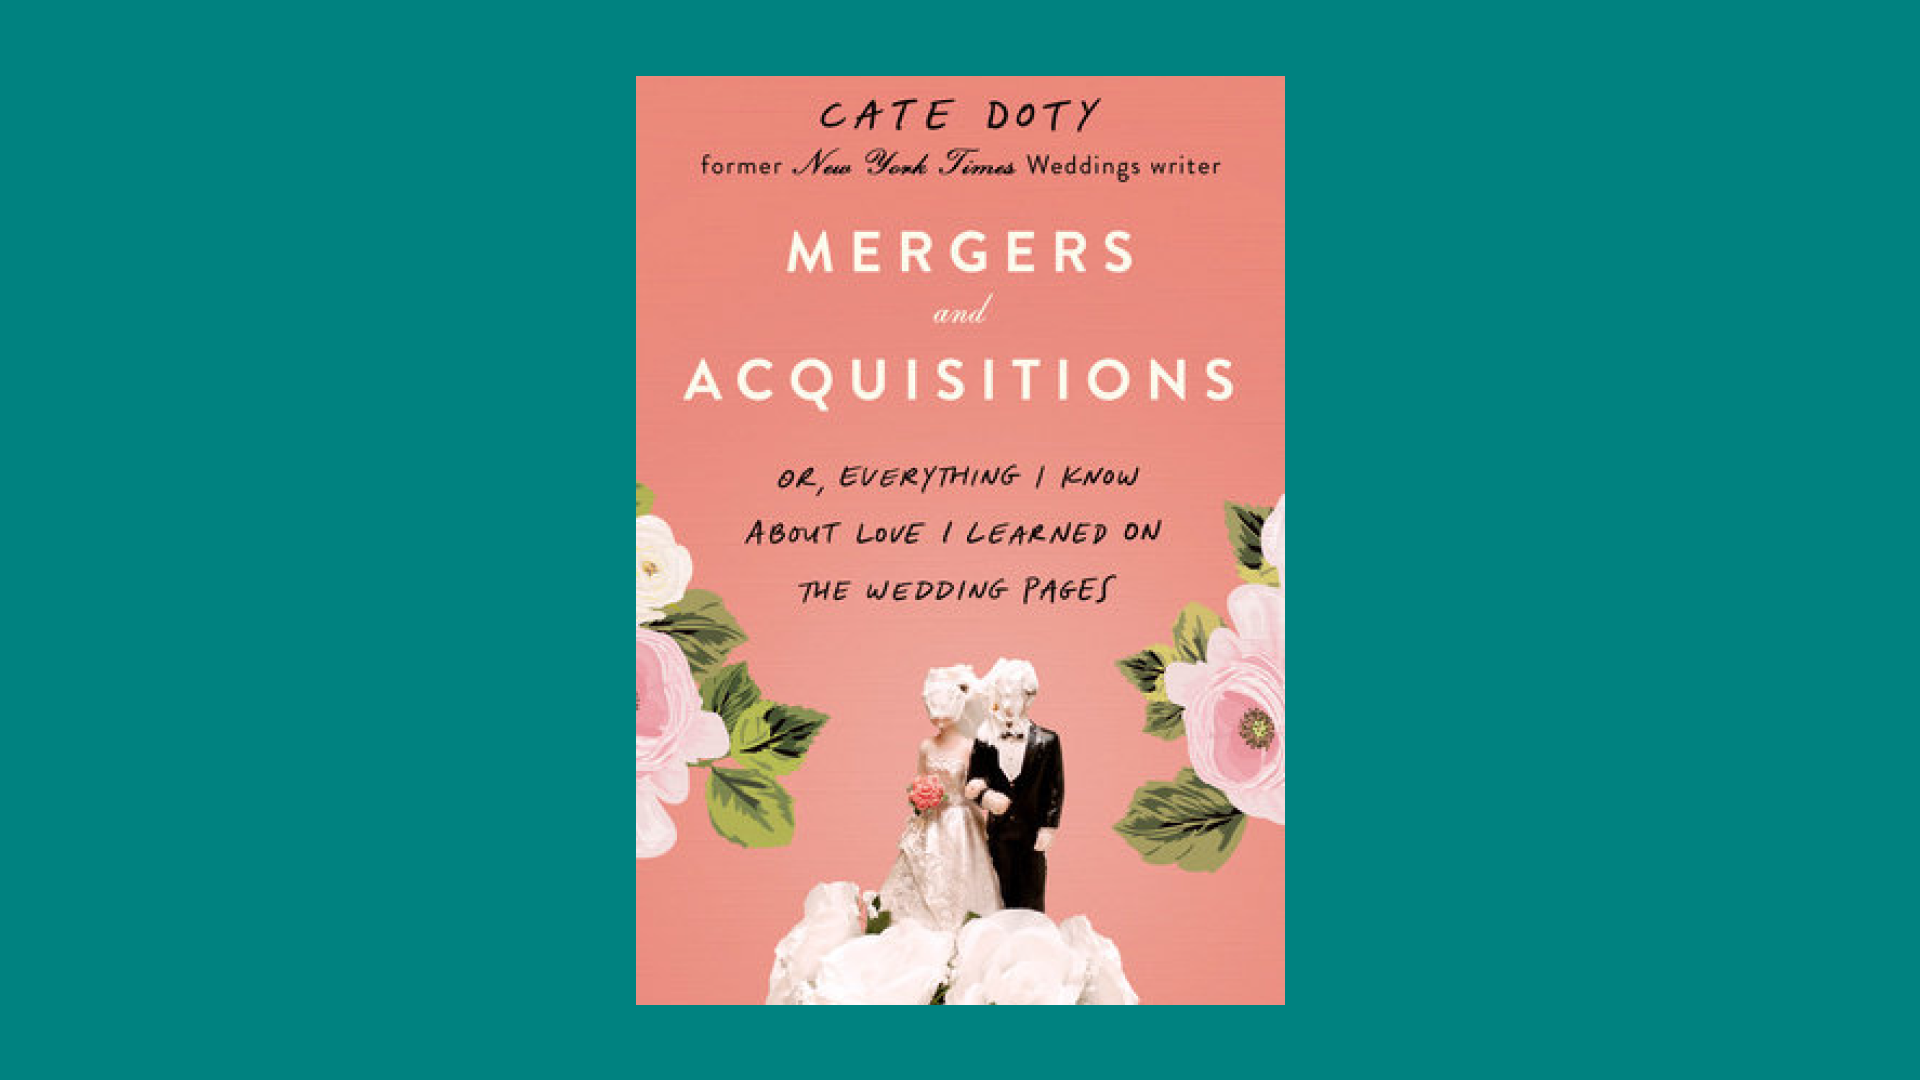 “Mergers and Acquisitions” by Cate Doty